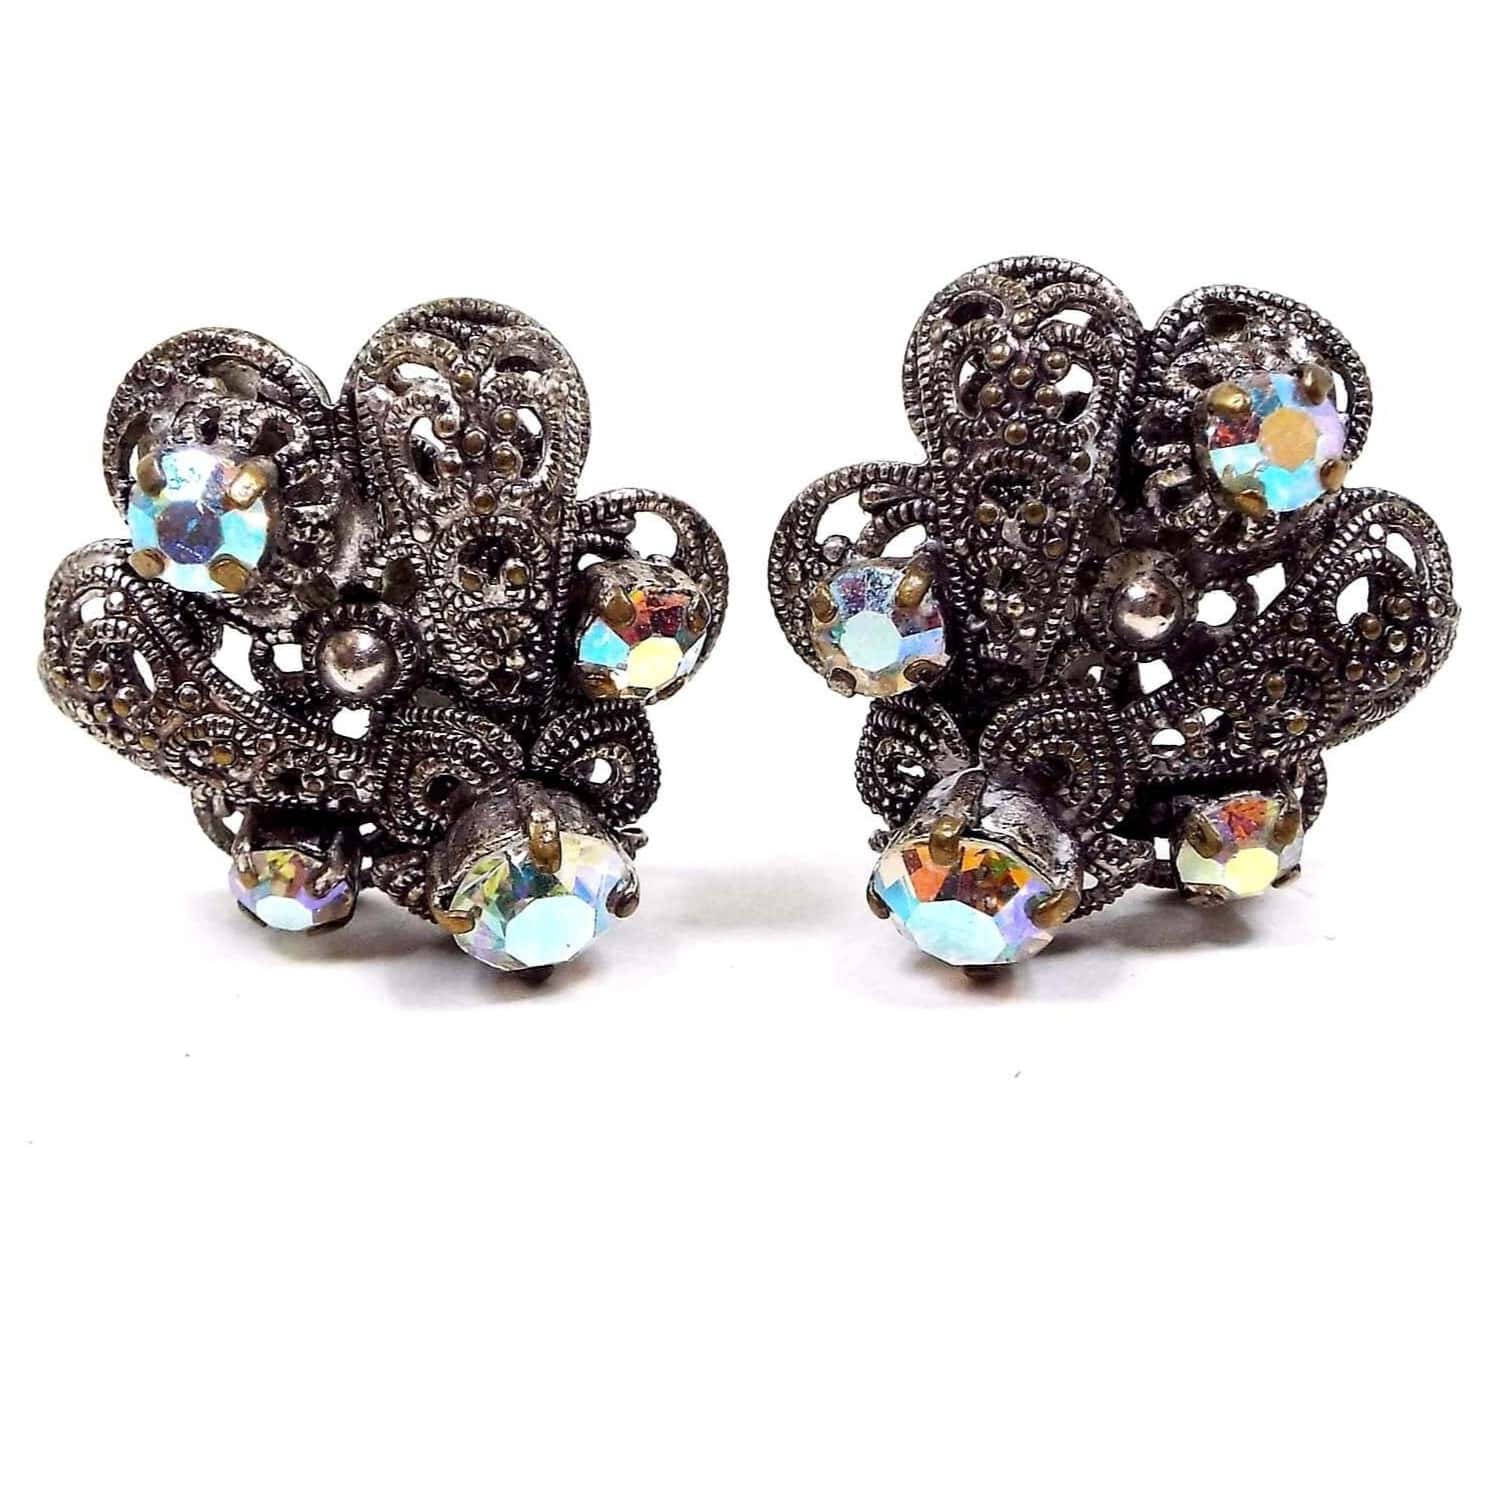 Front view of the Mid Century vintage German AB rhinestone clip on earrings. The metal is darkened silver tone color from age. It has a filigree sort of peacock feather flare style design with rounded ends and every other part has a small round AB clear rhinestone on it. The rhinestones are prong set and have a coating to give them a multi color shimmer when you move around.